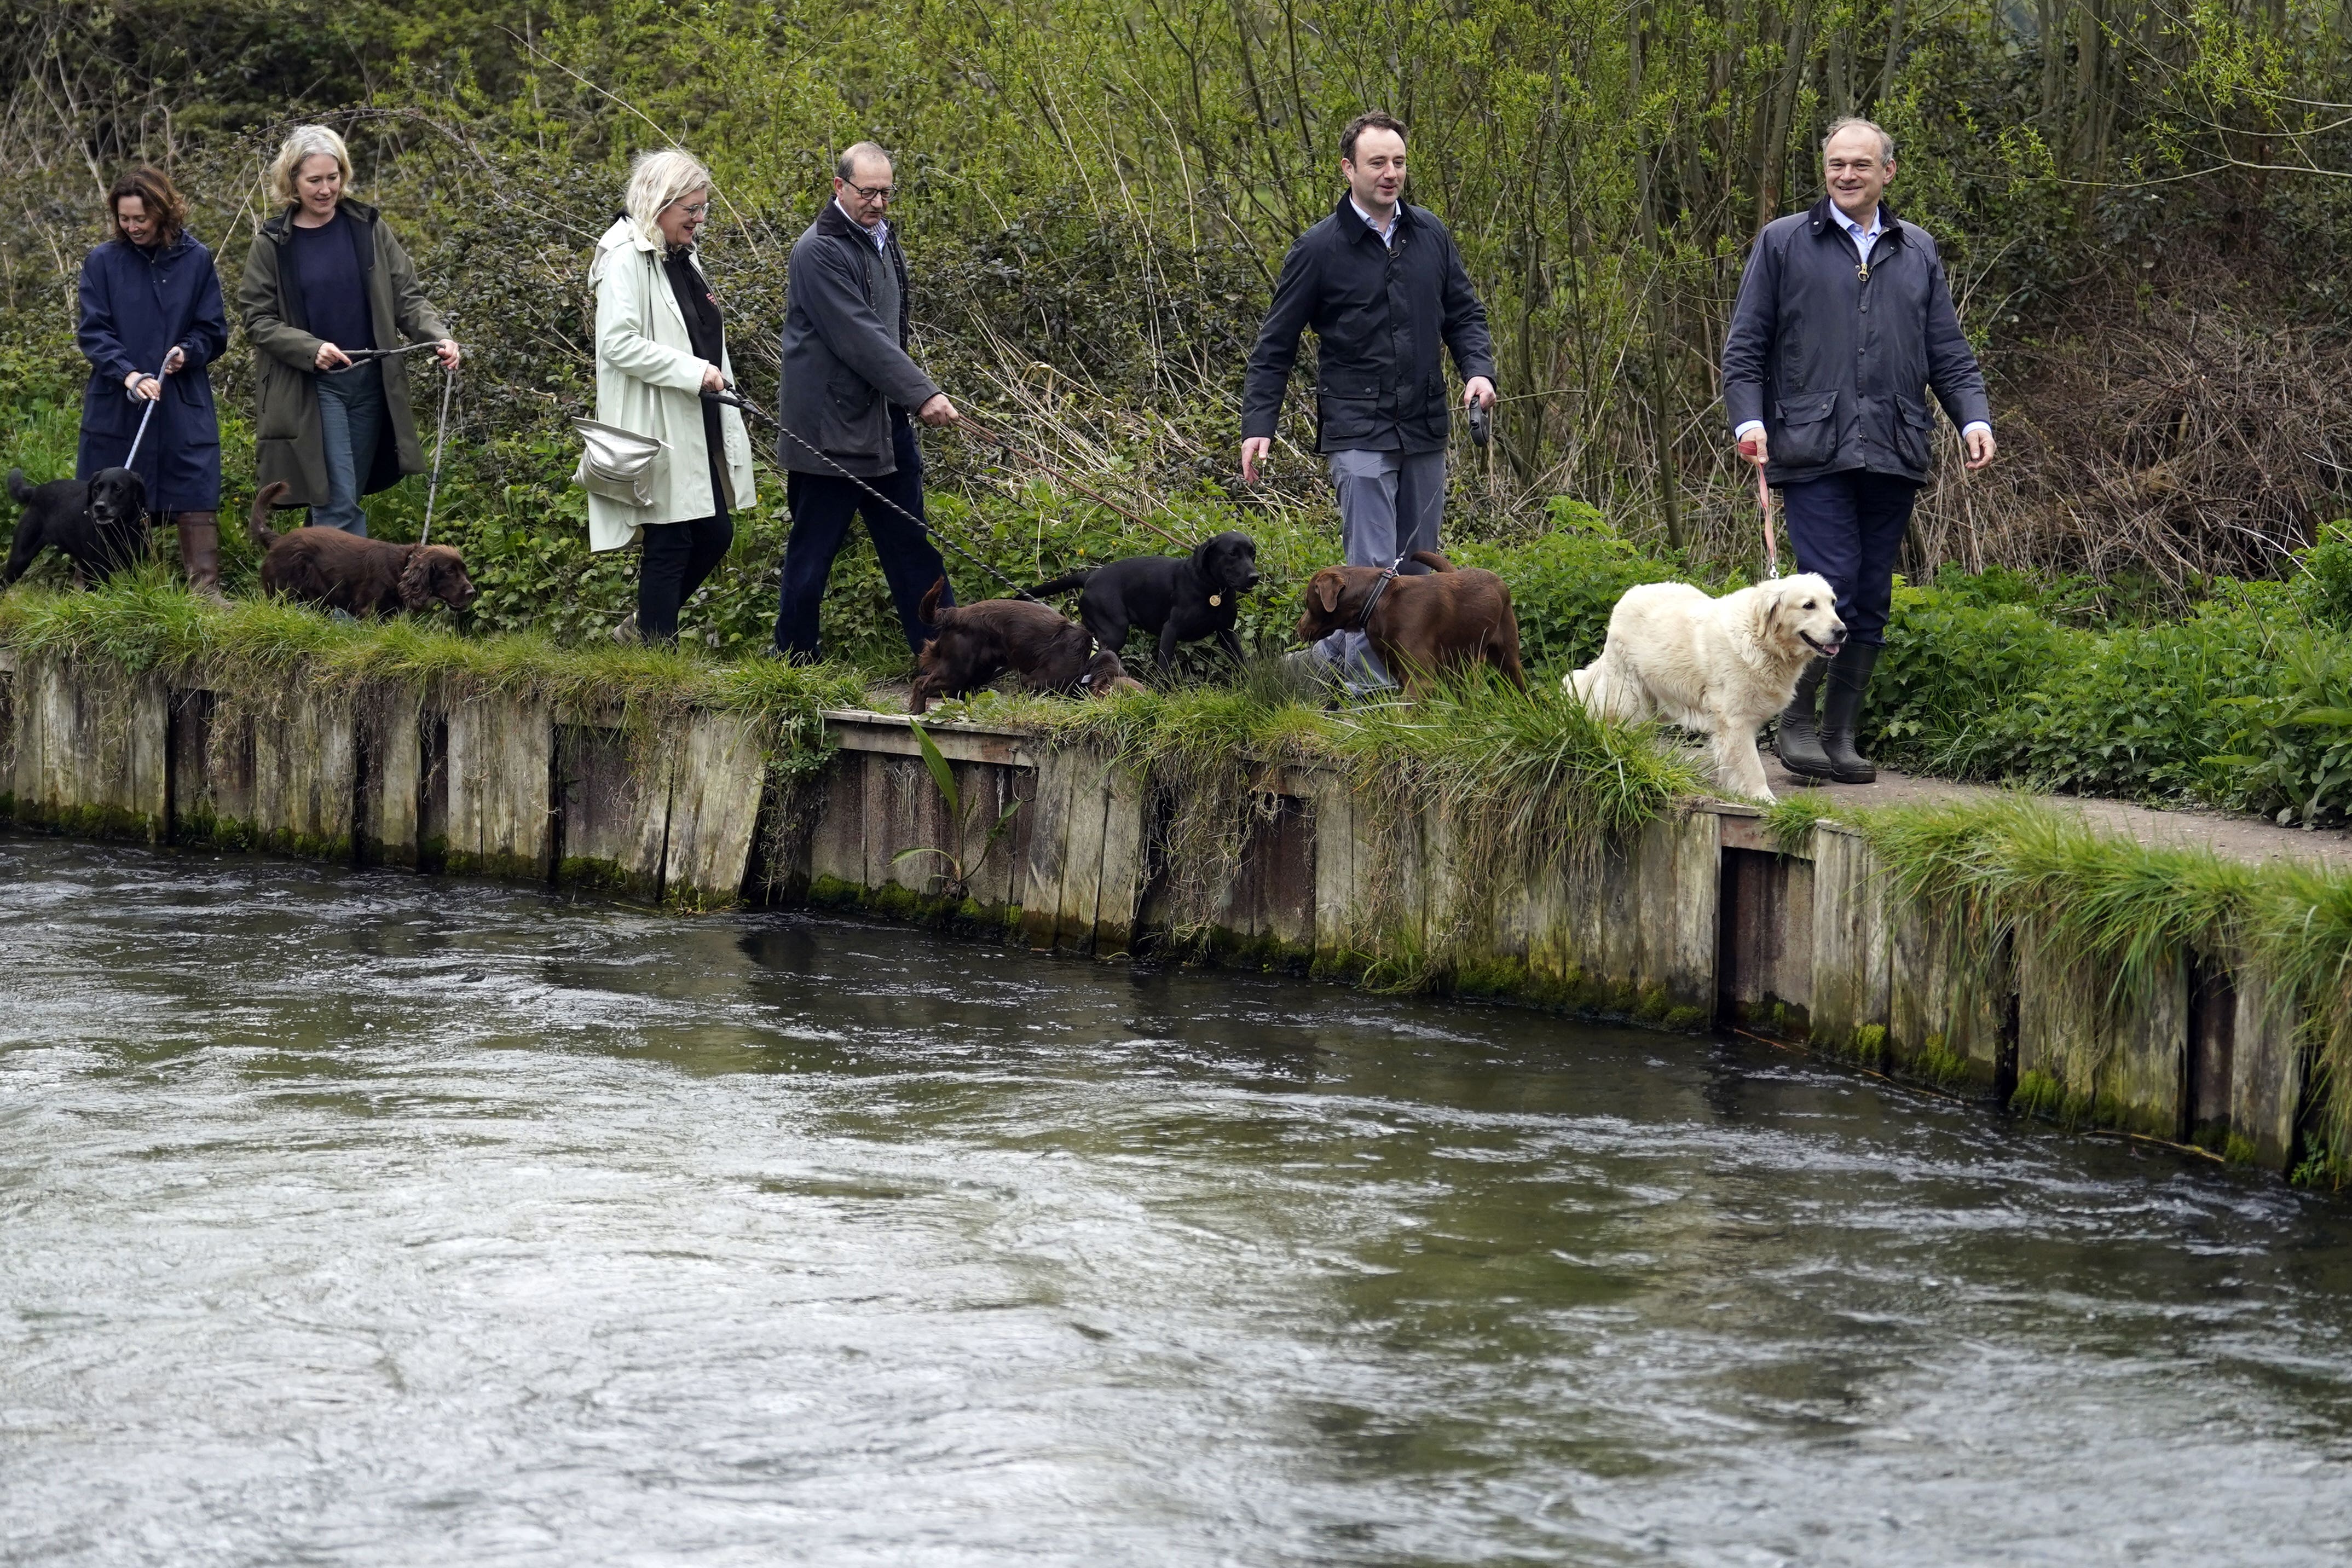 Liberal Democrat leader Sir Ed Davey (right) and Danny Chambers, the Liberal Democrats Parliamentary Candidate for Winchester & Chandler’s Ford (2nd right), during a local dog walk along the River Itchen near Winchester, a chalk stream which has been damaged by sewage discharges (Andrew Andrew Matthews/PA)